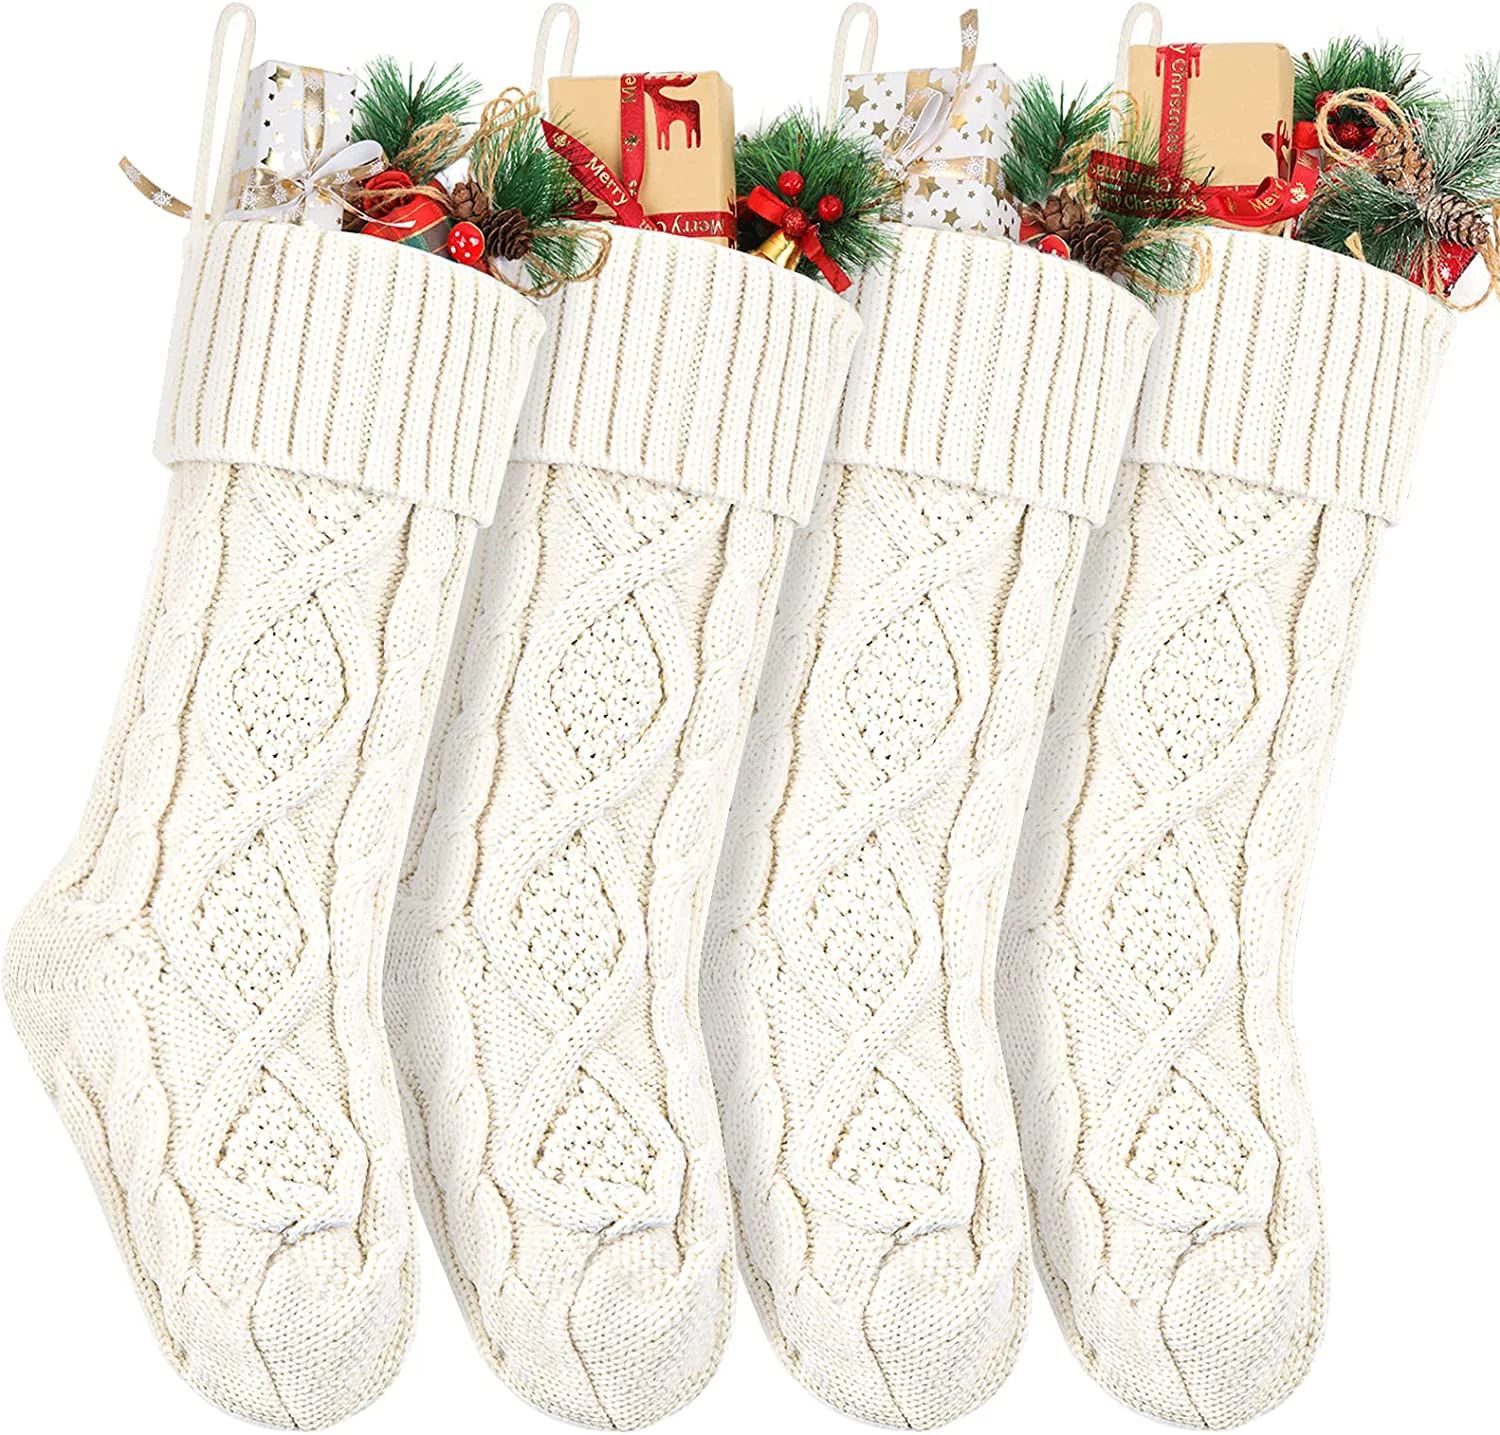 Swtroom 4 Pack Christmas Stockings 10 Inches Large Size Cable Knitted Stocking Gifts & Decoration... | Walmart (US)